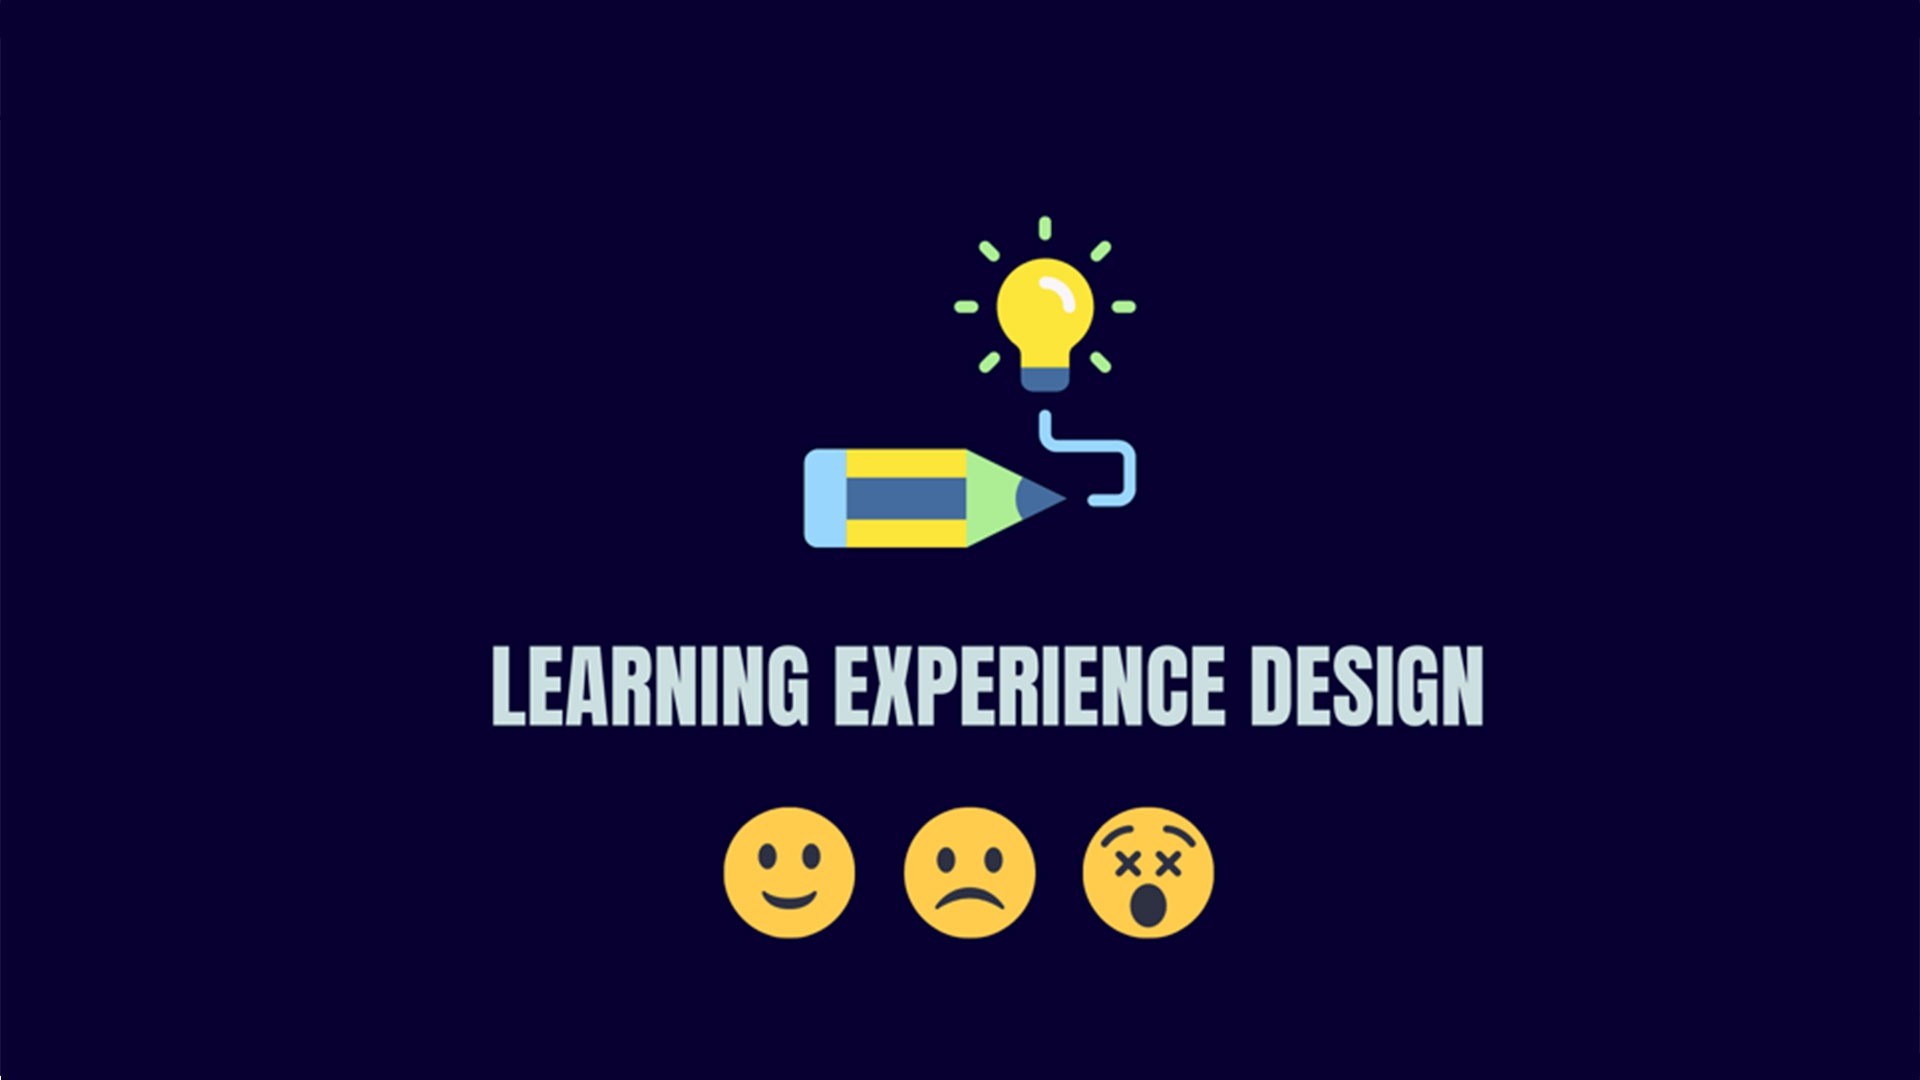 The Future of Education Is All About the Experiences We Create